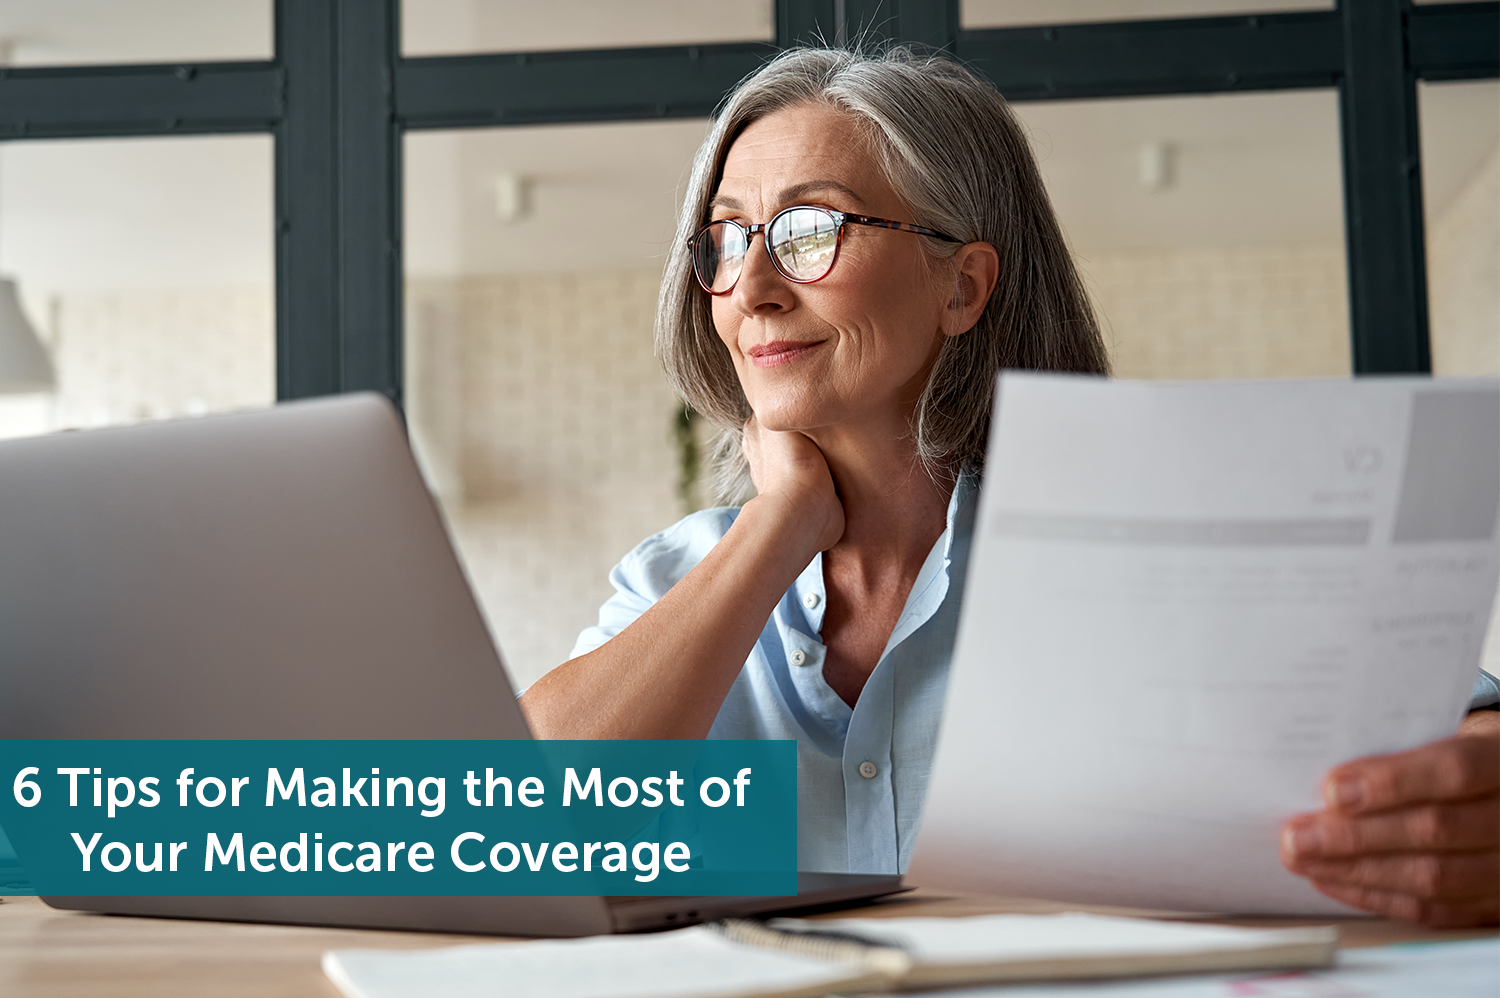 A senior woman looking at her computer and Medicare coverage, smiling.